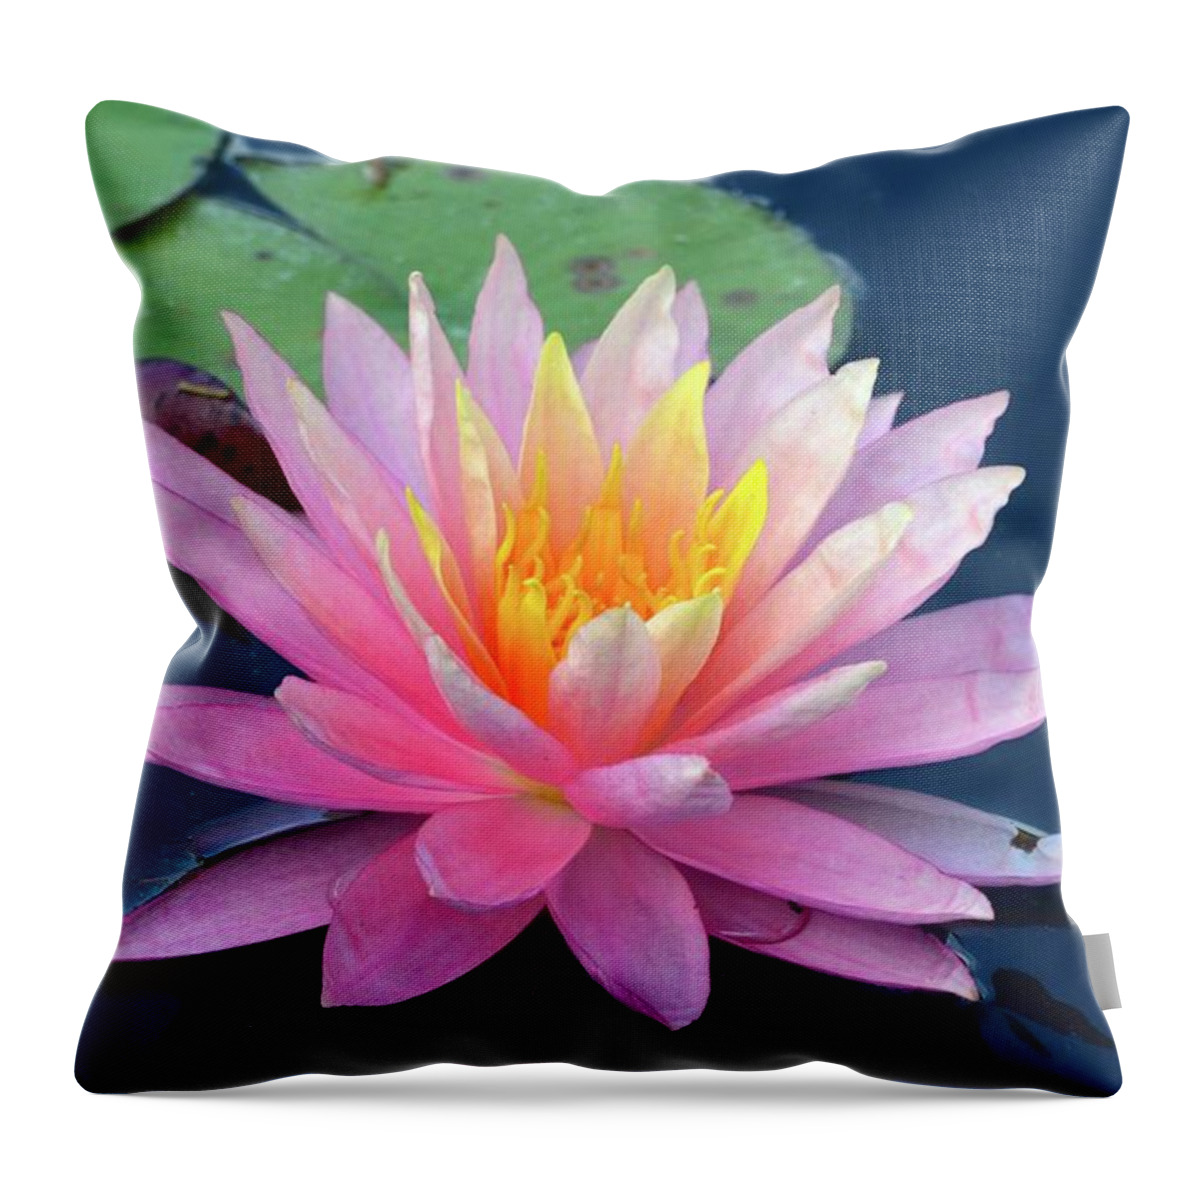 Lily Throw Pillow featuring the photograph Lovely Pink Water Lily by Richard Bryce and Family